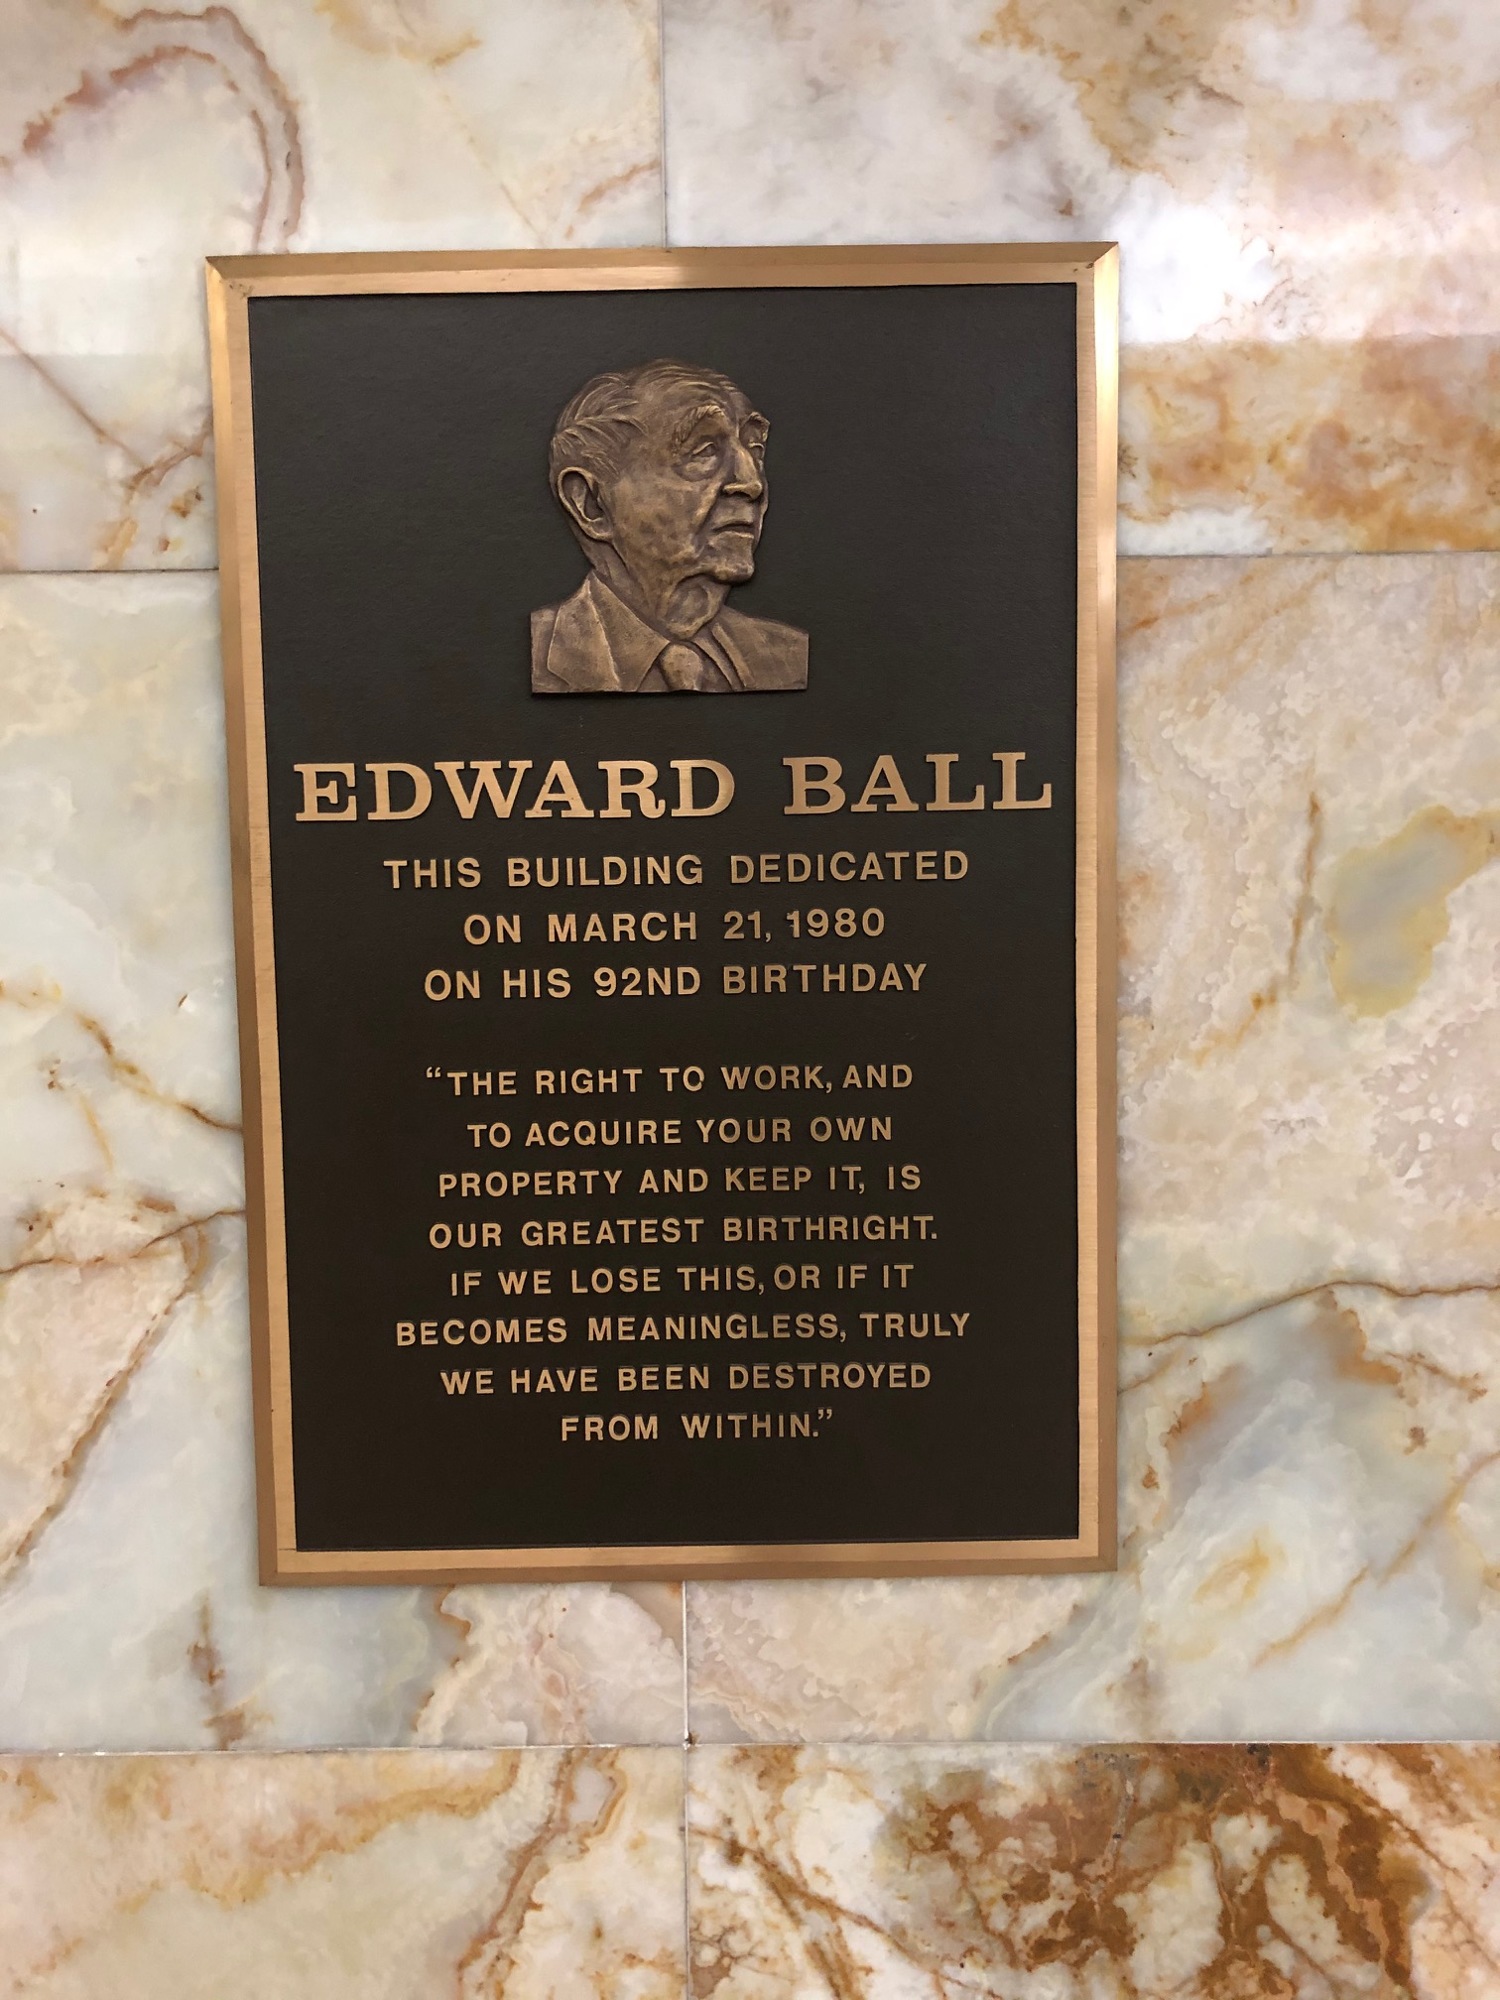 This bronze plaque hangs on the second-floor of the city-owned Downtown Edward Ball Building.